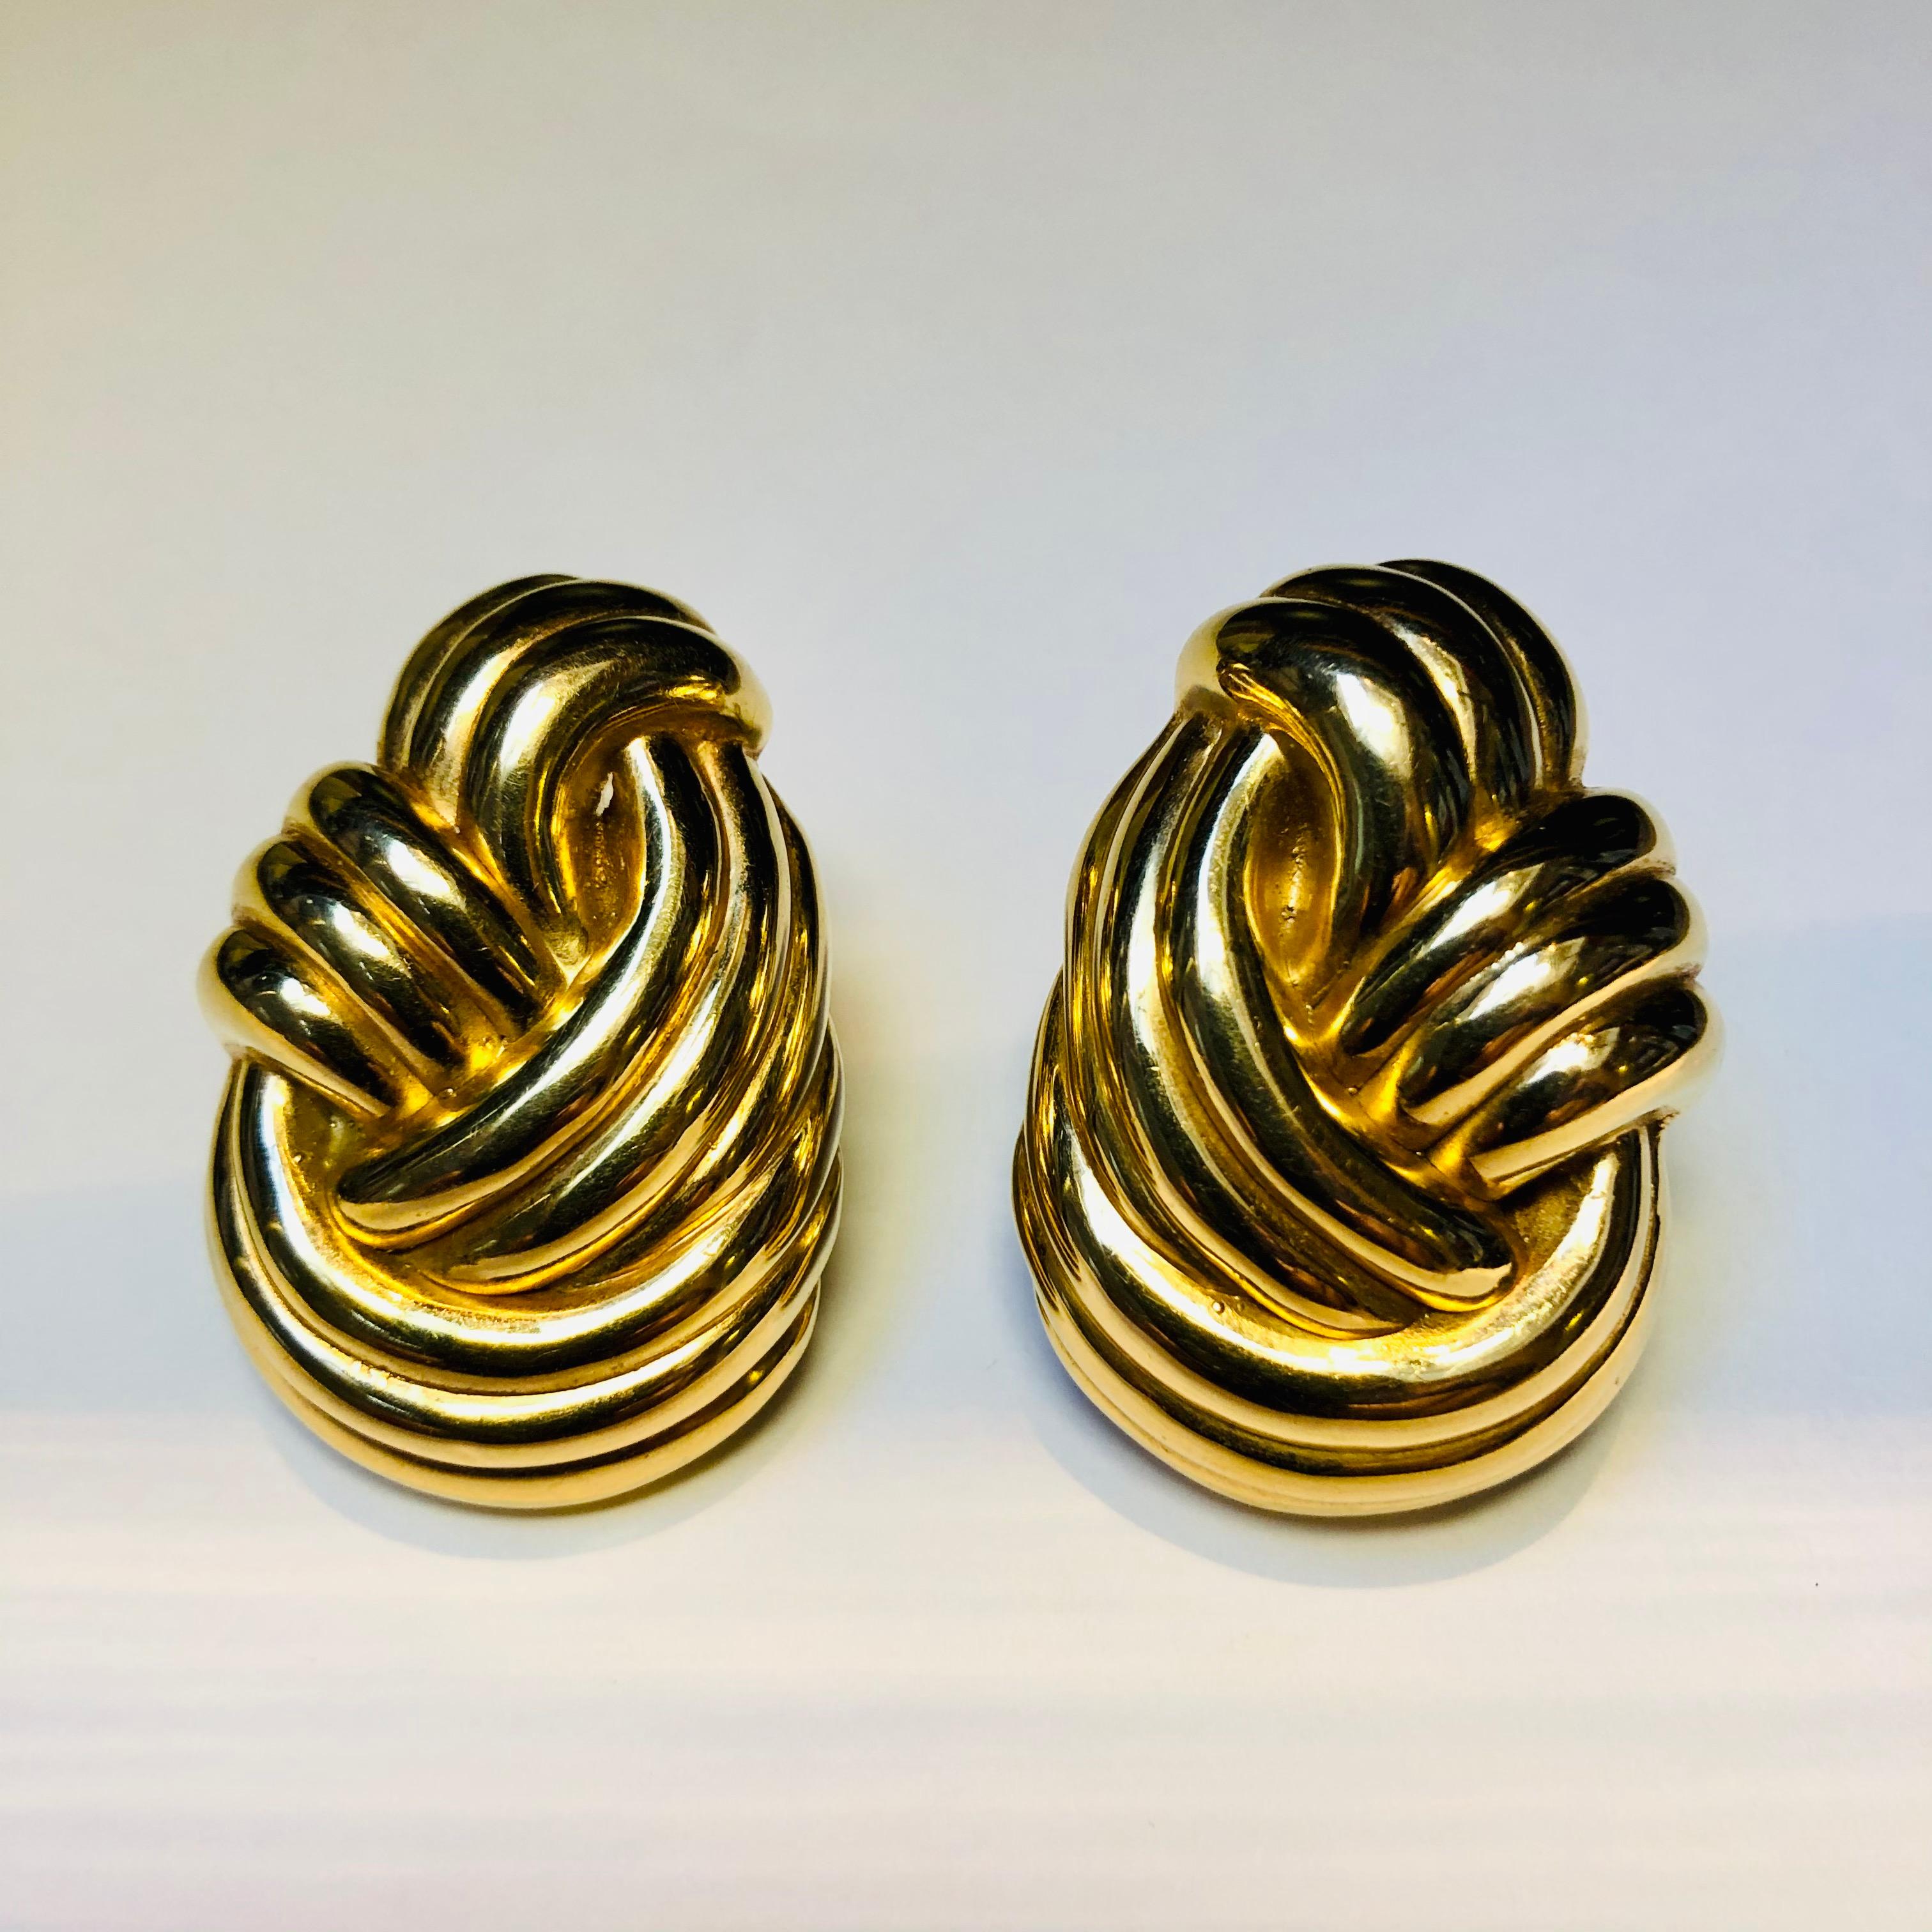 Large gold knot earring in 18 carat yellow gold with post and clip fittings (French clips). Offering a distinctly 1980’s and contemporary take on grown up glamour. These earrings have a weighty look but are light and wearable for all day and night